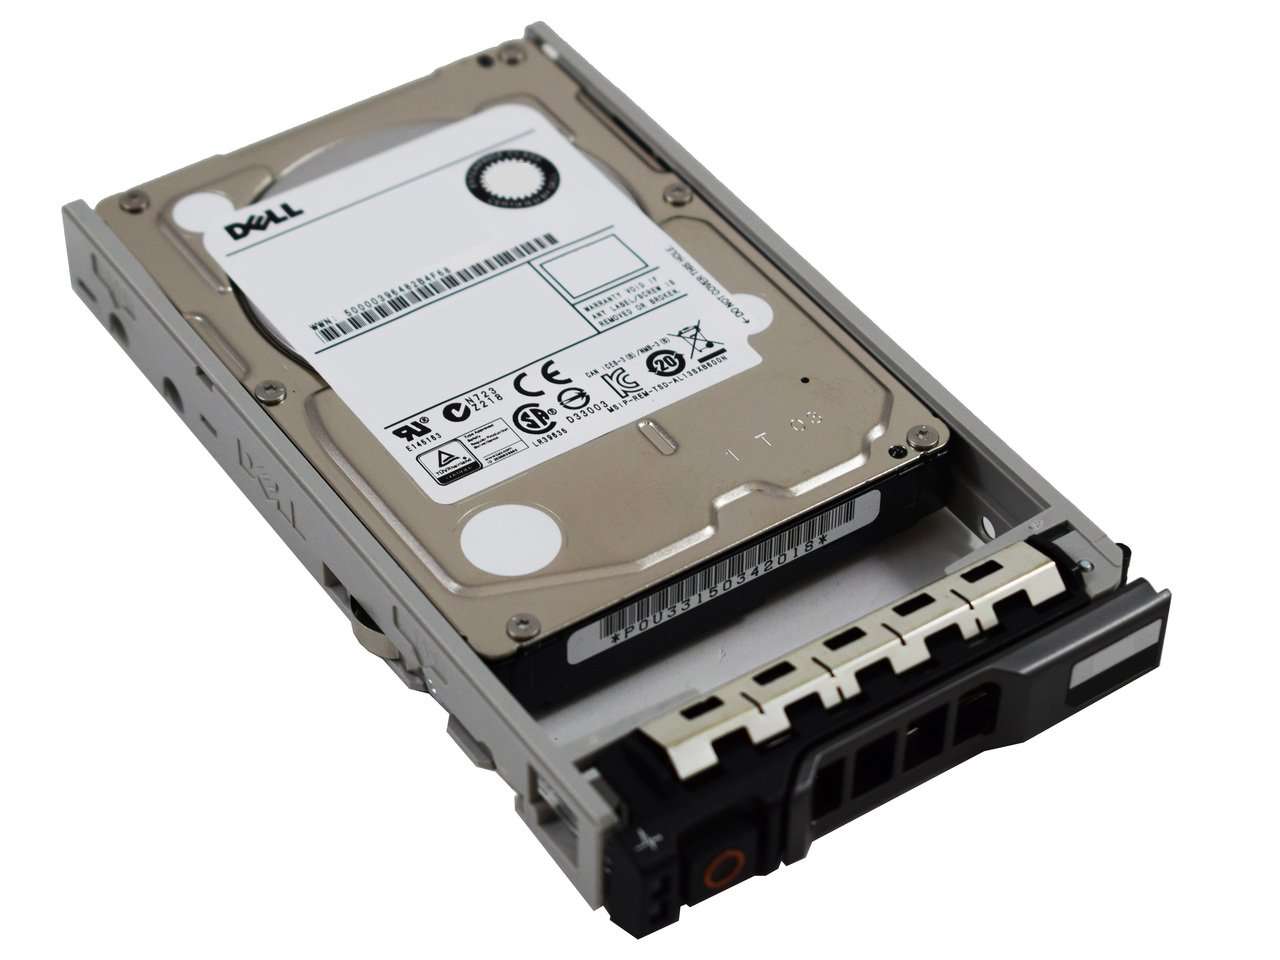 Dell G13 342-4173 600GB 10K RPM SAS 6Gb/s 512n 2.5" Manufacturer Recertified HDD